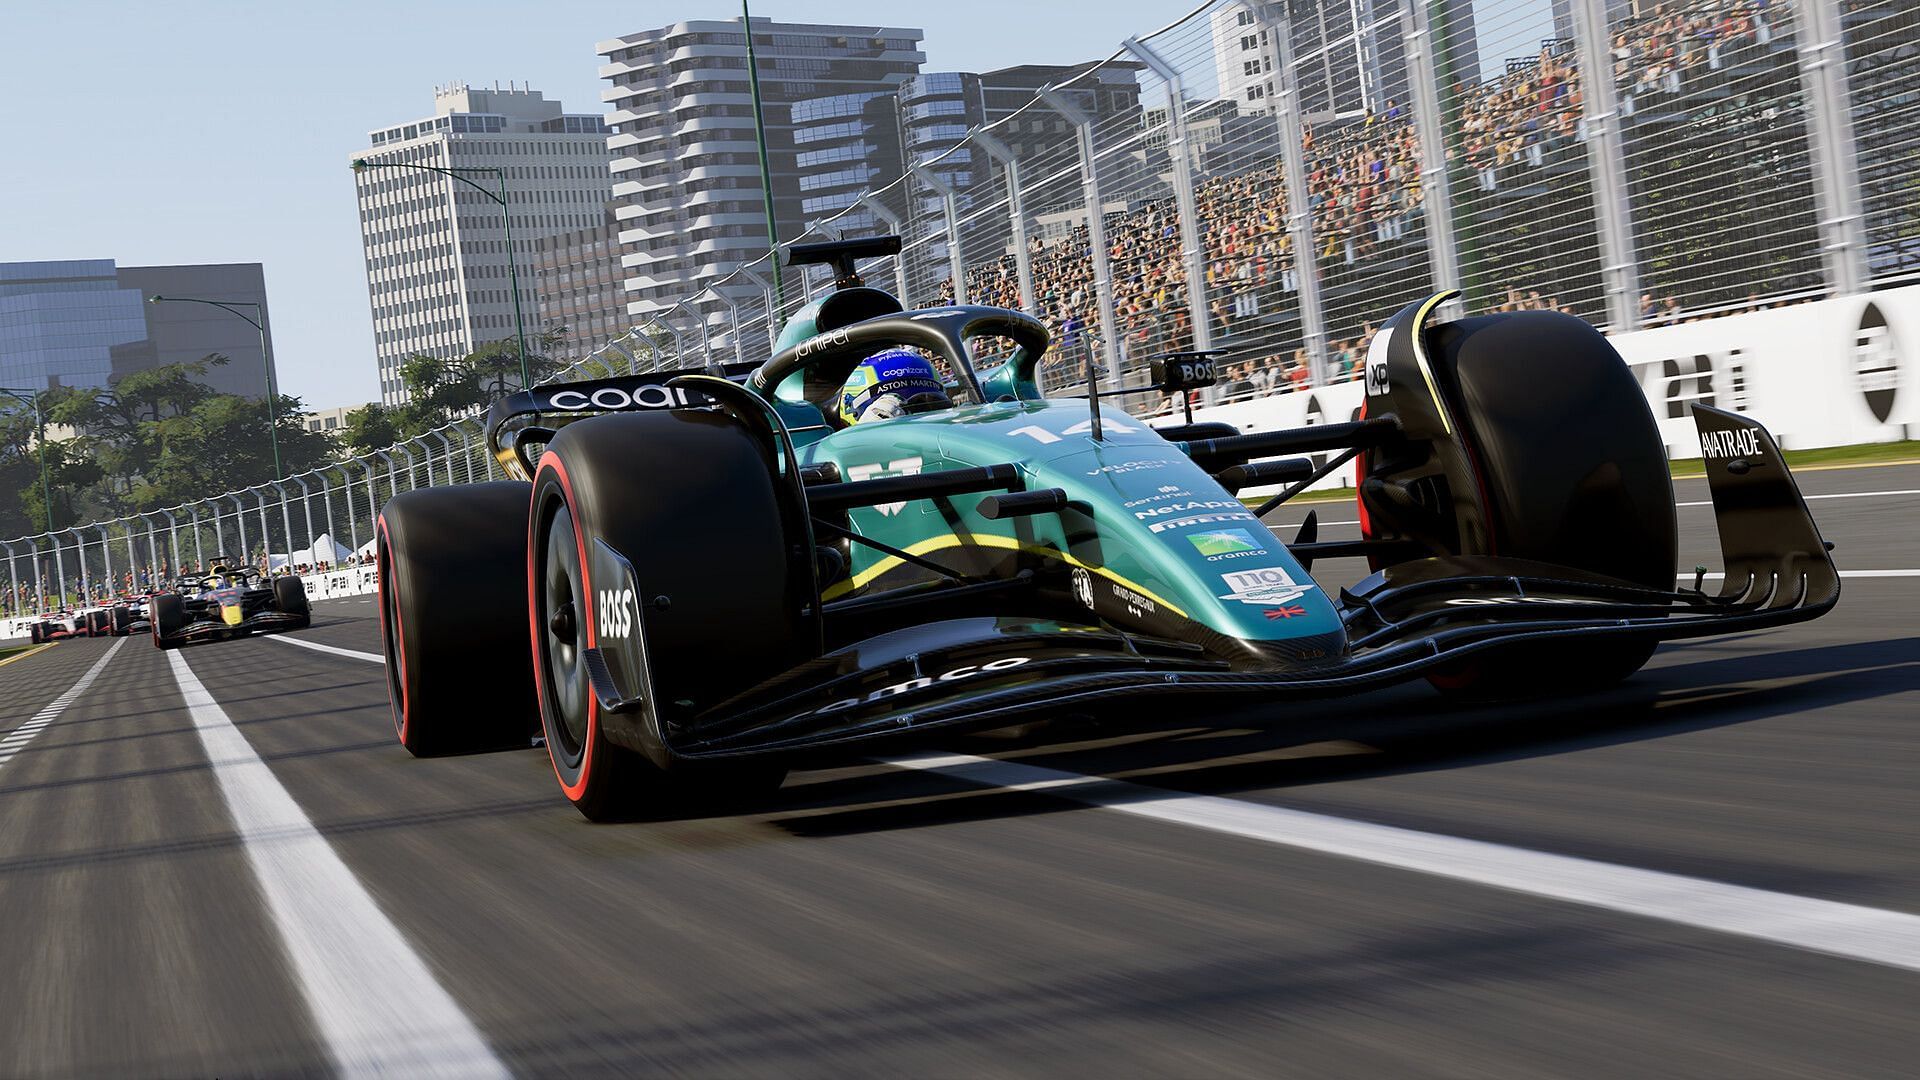 Customize the look of your car in F1 23 (Image via Electronic Arts)